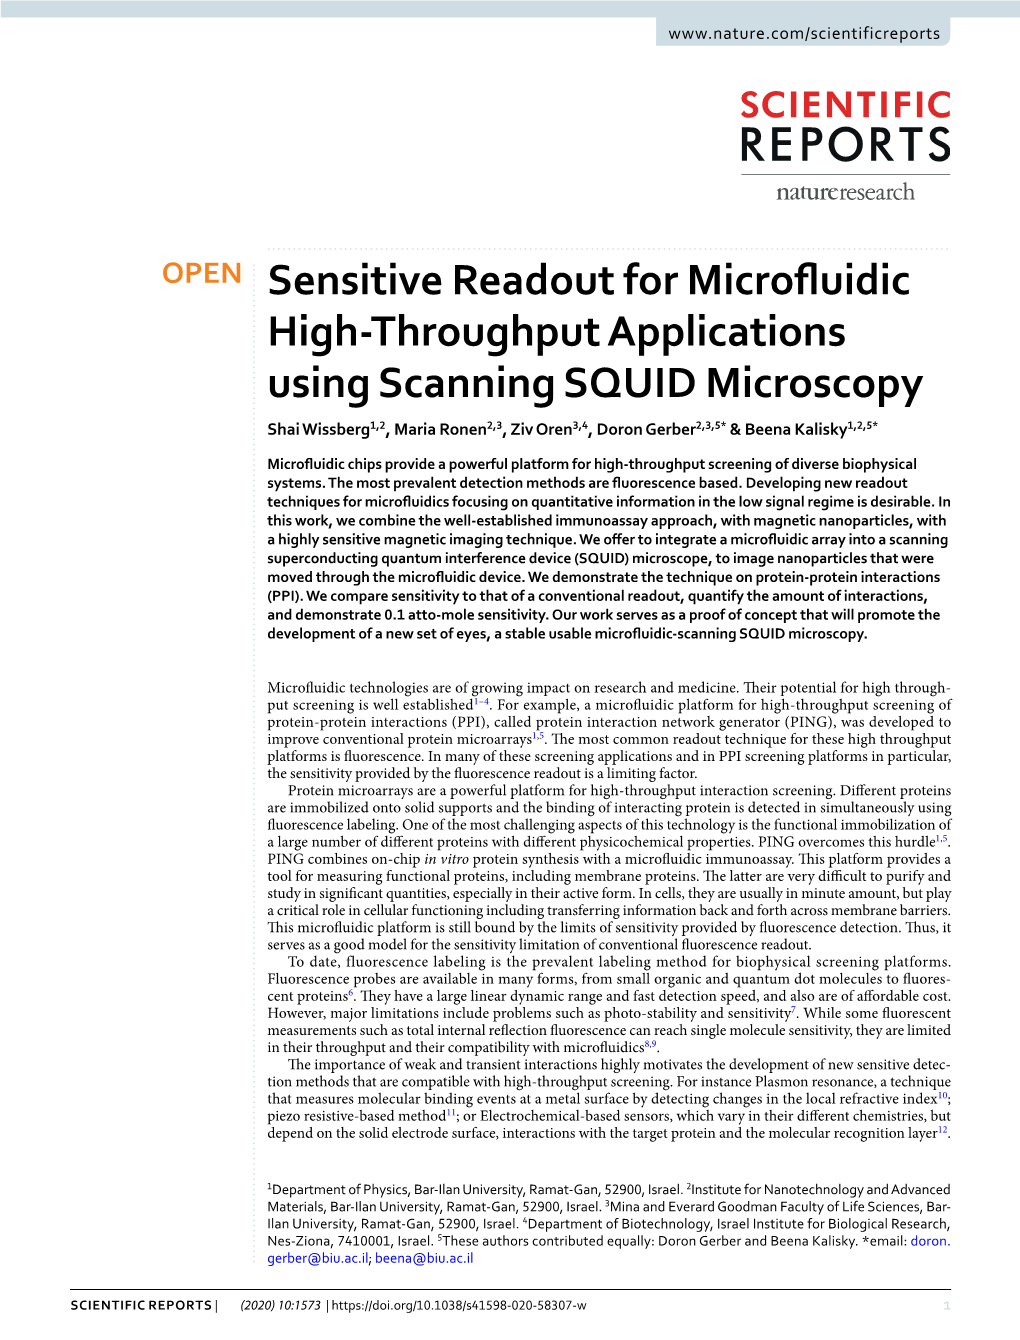 Sensitive Readout for Microfluidic High-Throughput Applications Using Scanning SQUID Microscopy